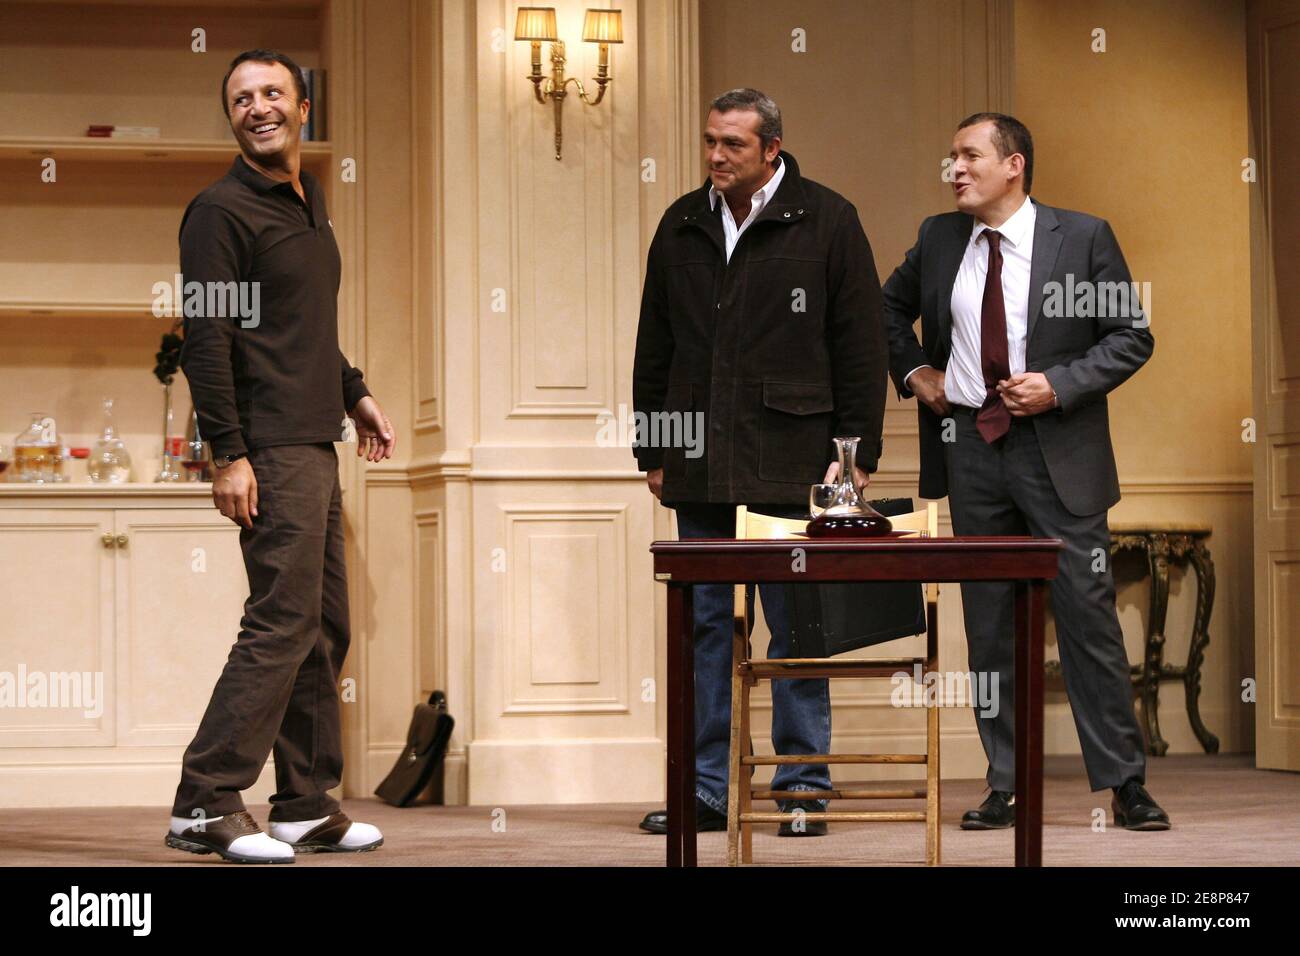 French actors Dany Boon, Laurent Gamelon and Arthur during the run-through of the play 'Le Diner de Cons', staged by Francis Veber at the Theatre de la Porte Saint-Martin in Paris, France on September 19, 2007. Also starring in the play: Stephane Bierry, Jessica Borio, Olivier Granier and Juliette Meyniac. Photo by Thierry Orban/ABACAPRESS.COM Stock Photo